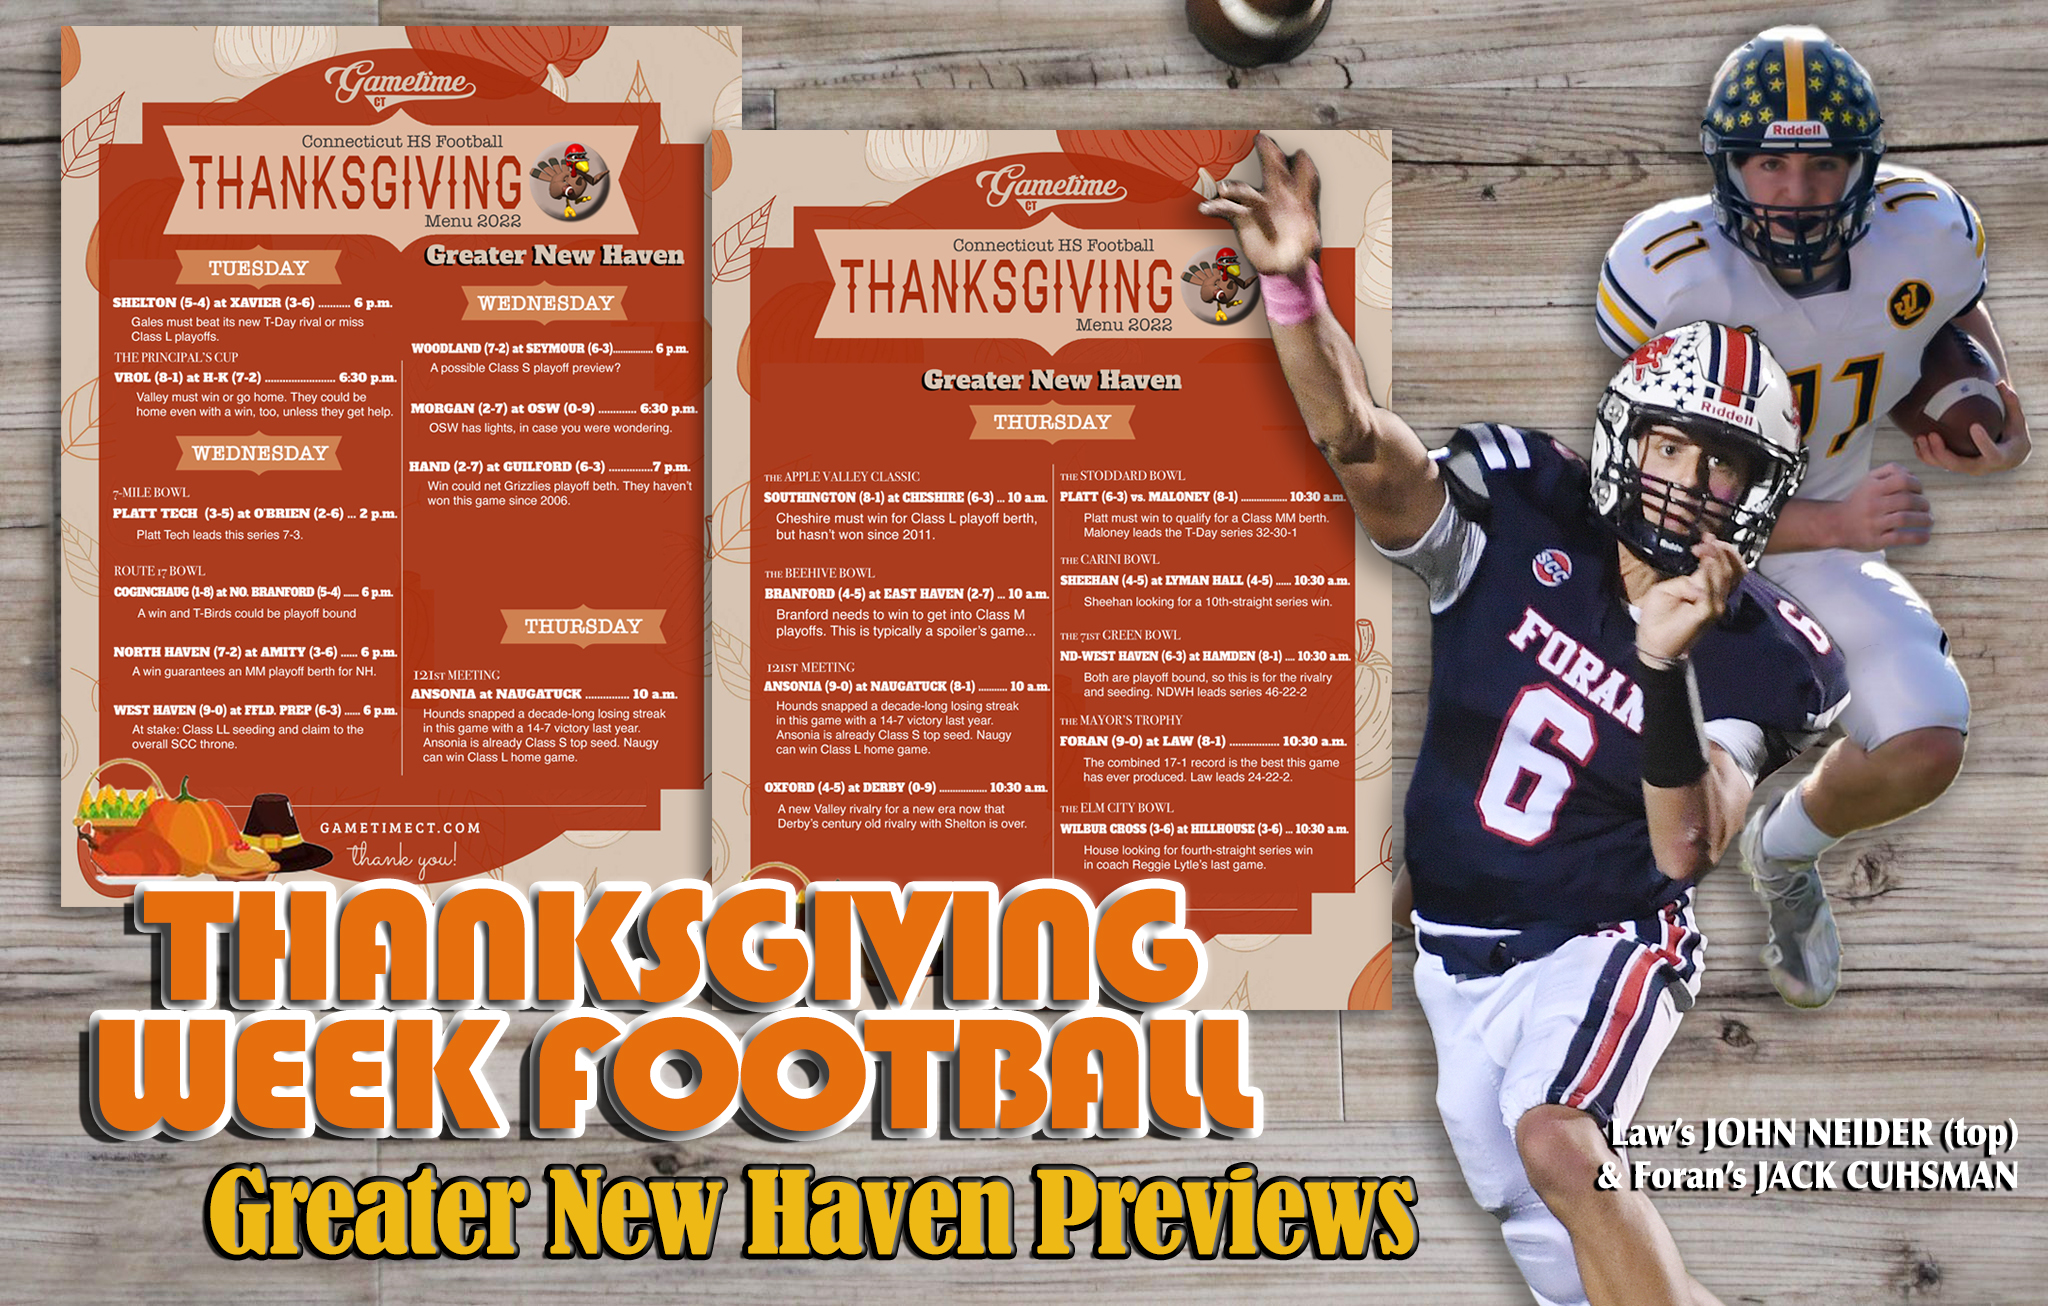 Football capsules for Thanksgiving football games in Greater New